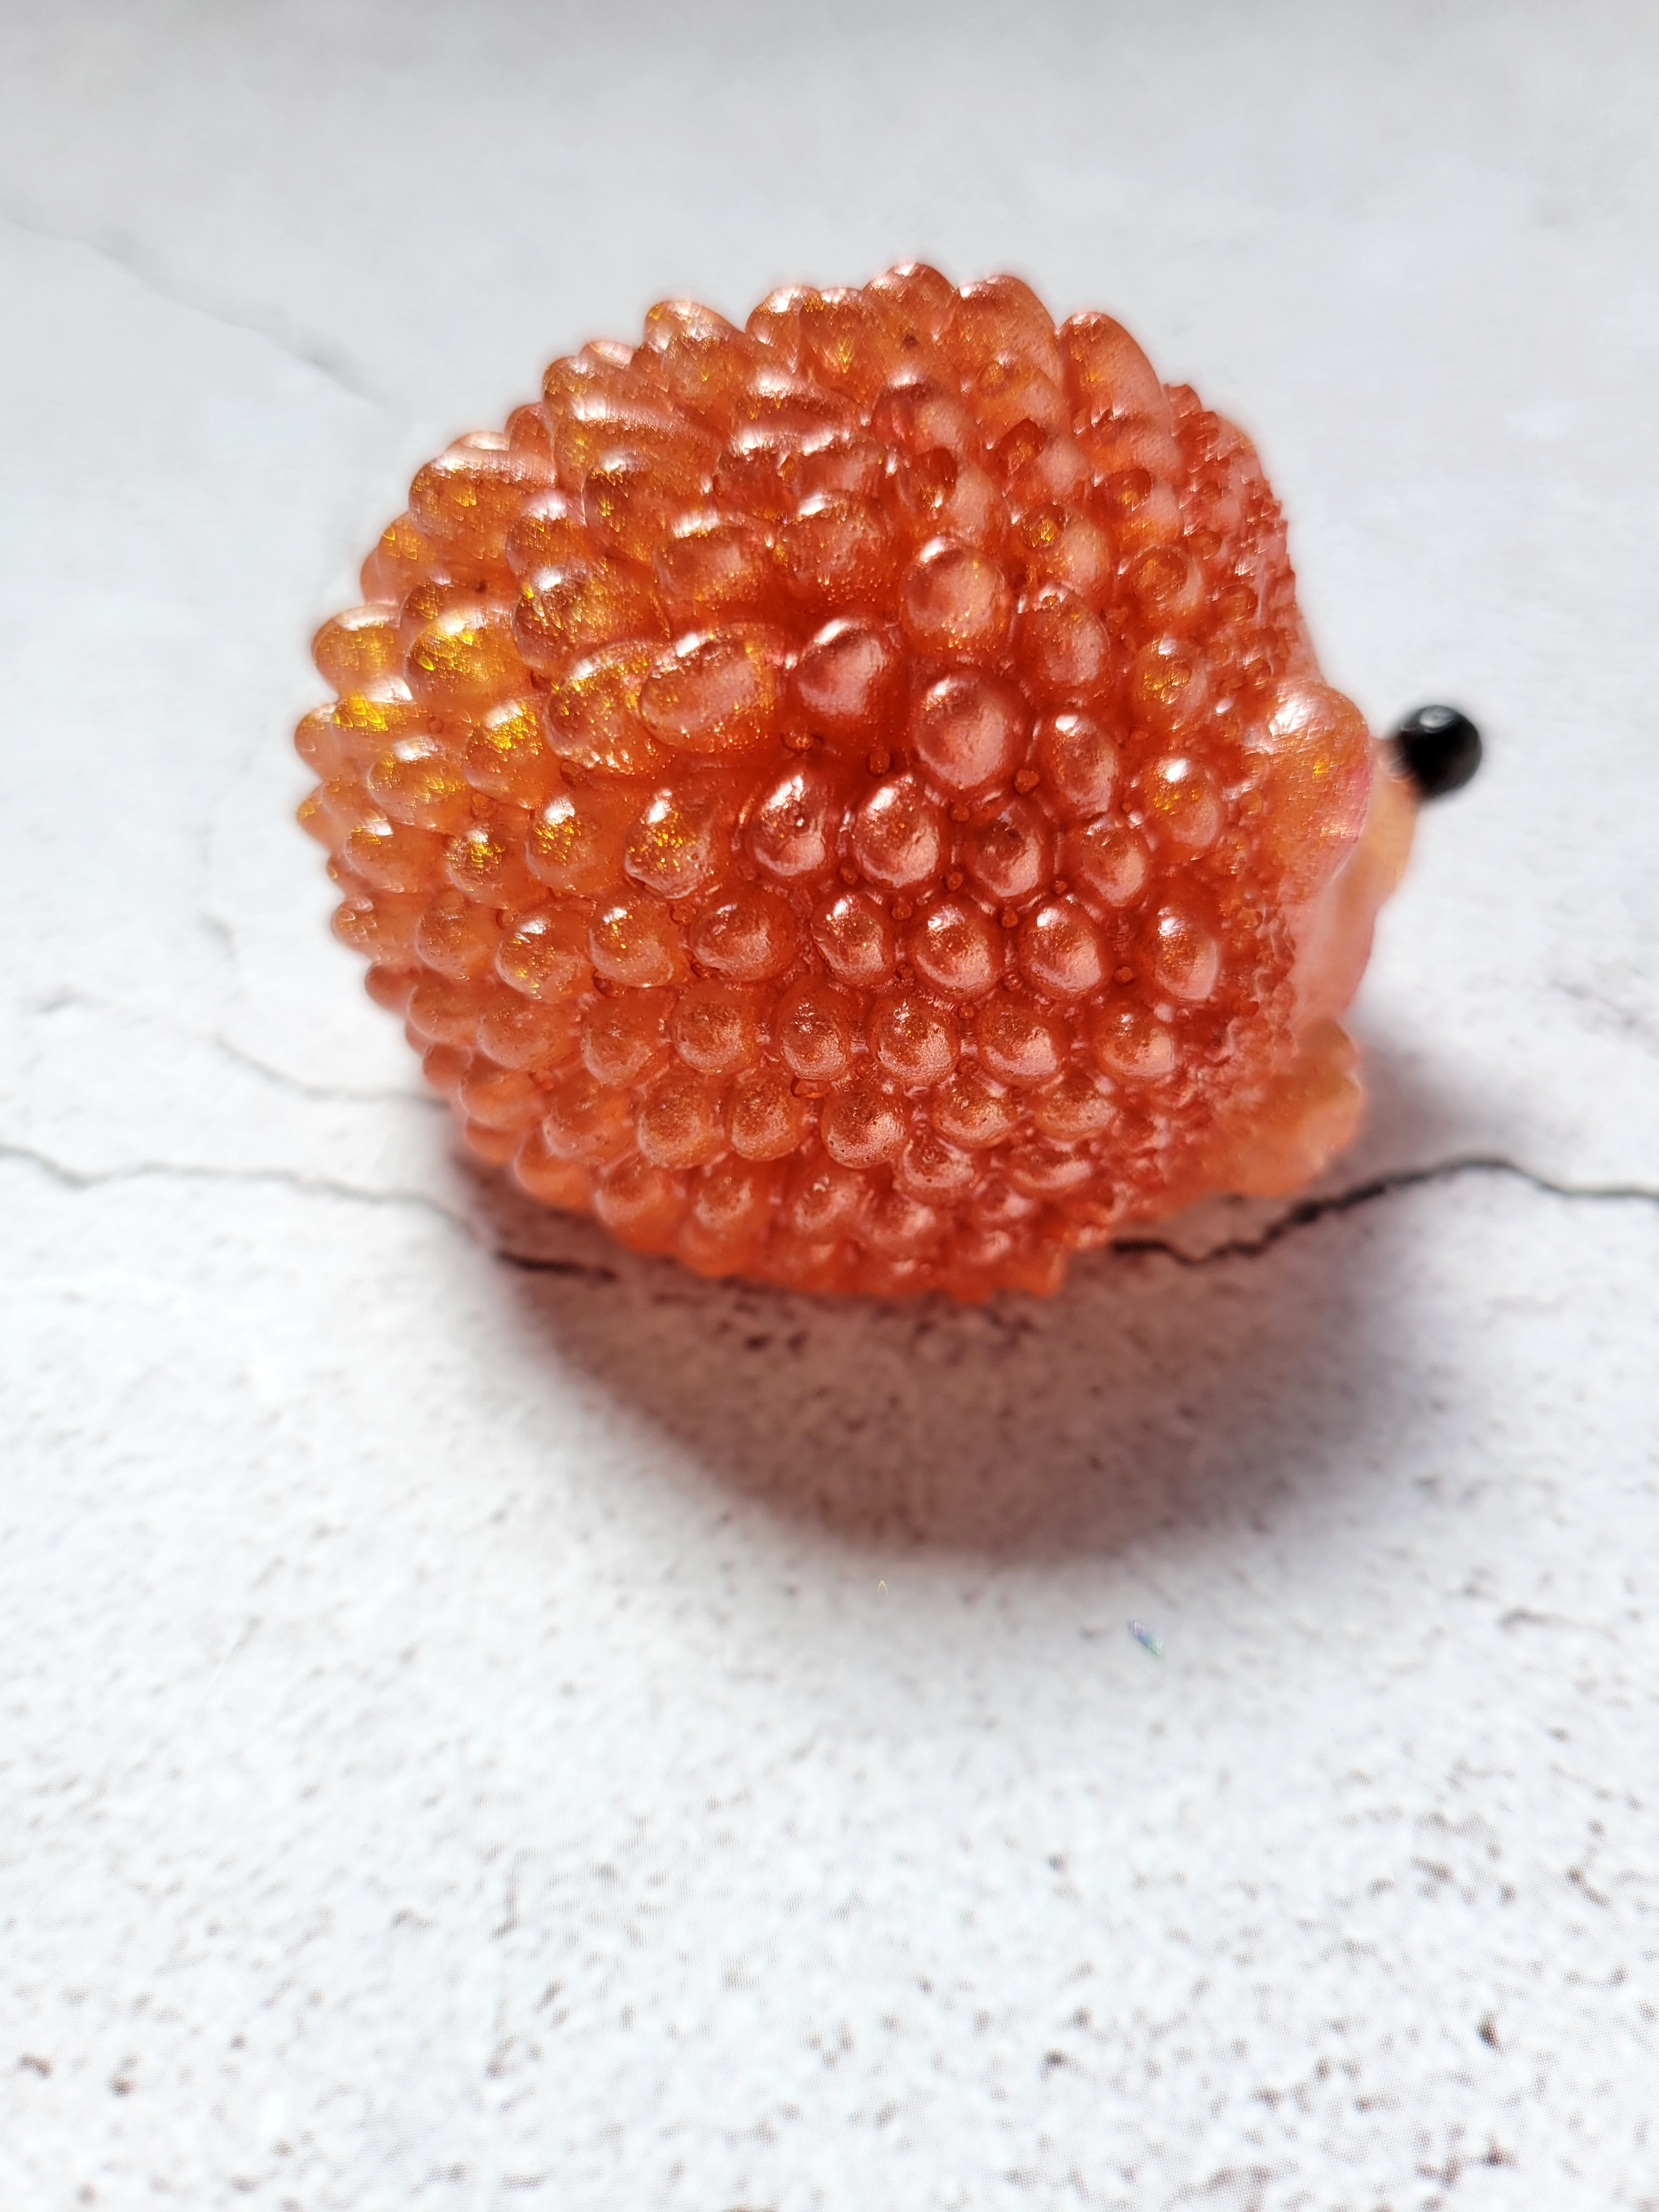 A side view of a hedgehog figure. It has black painted eyes and nose. It's ears and mouth are painted red. It's a dark orange color. It's front paw is raised slightly.